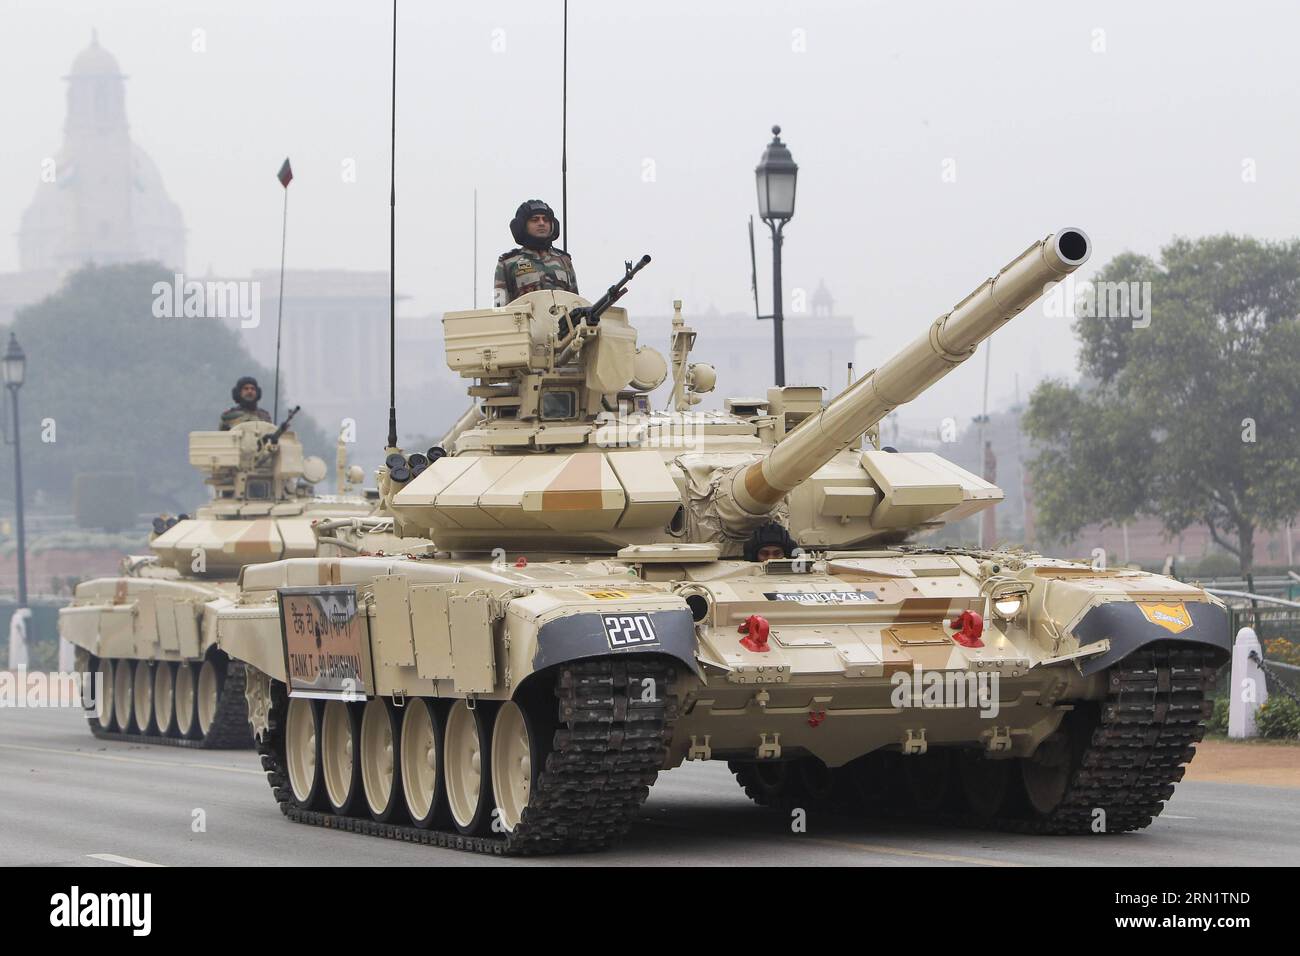 (150121) -- NEW DELHI, Jan. 21, 2015 -- India s T-90 tanks move during the rehearsal for the Republic Day parade on the Raj Path in New Delhi, India, Jan. 21, 2015. India is to celebrate its 66th Republic Day on Jan. 26 with a large military parade. ) (djj) INDIA-NEW DELHI-REPUBLIC DAY-REHEARSAL ZhengxHuansong PUBLICATIONxNOTxINxCHN   New Delhi Jan 21 2015 India S T 90 Tanks Move during The rehearsal for The Republic Day Parade ON The Raj Path in New Delhi India Jan 21 2015 India IS to Celebrate its  Republic Day ON Jan 26 With a Large Military Parade  India New Delhi Republic Day rehearsal  P Stock Photo